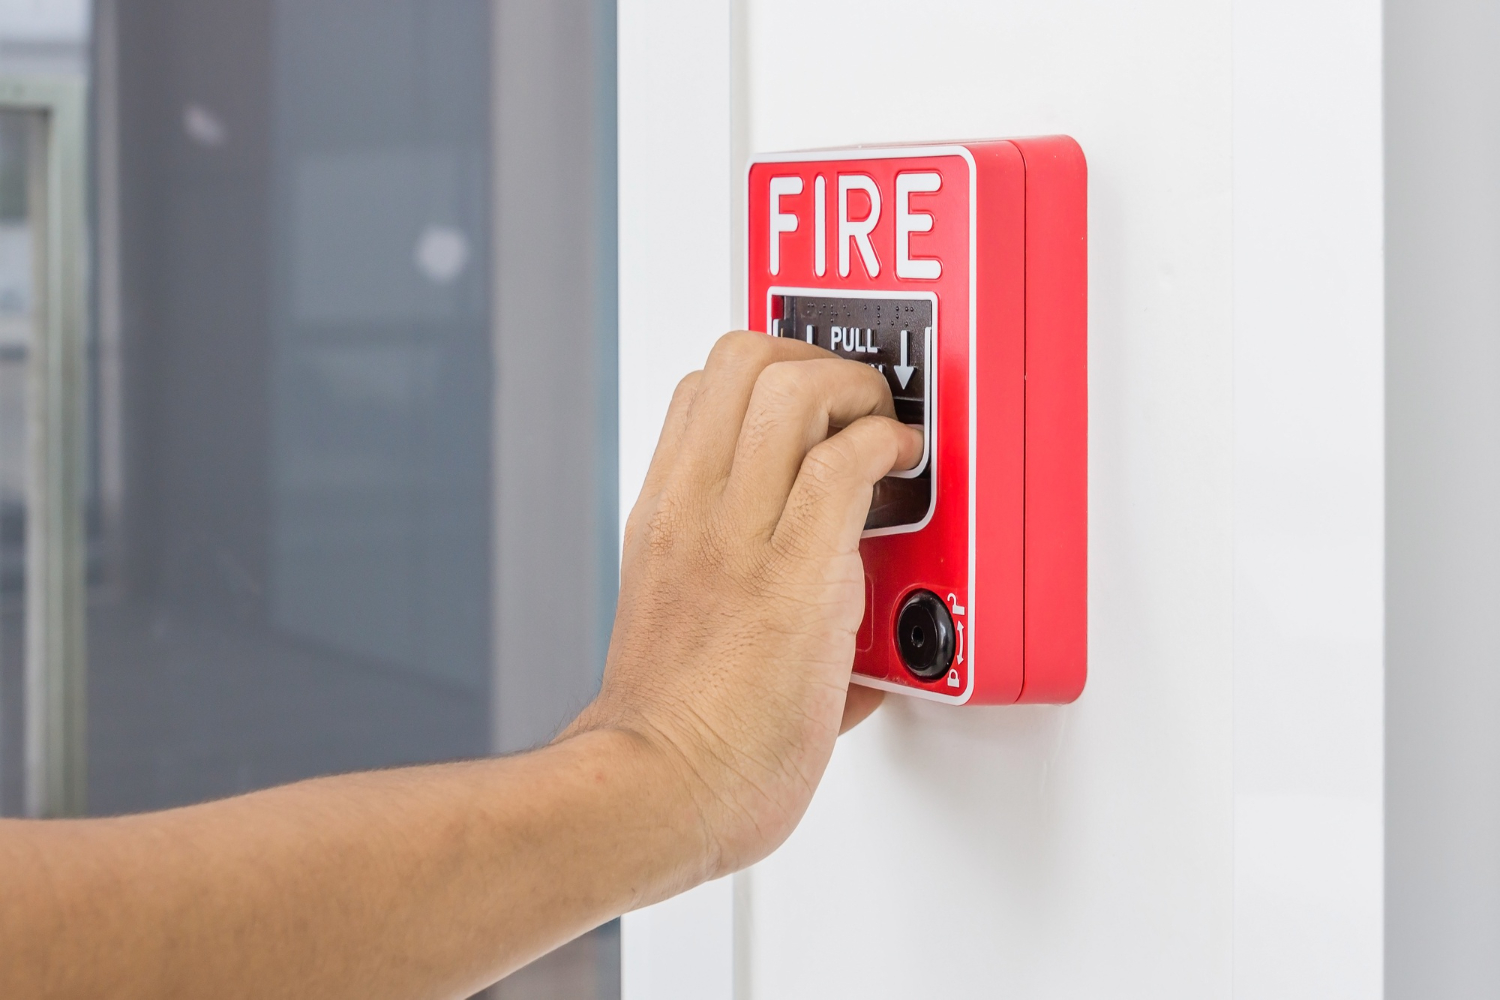 5 Best Fire Safety Practices to Protect Lives and Property in Emergency